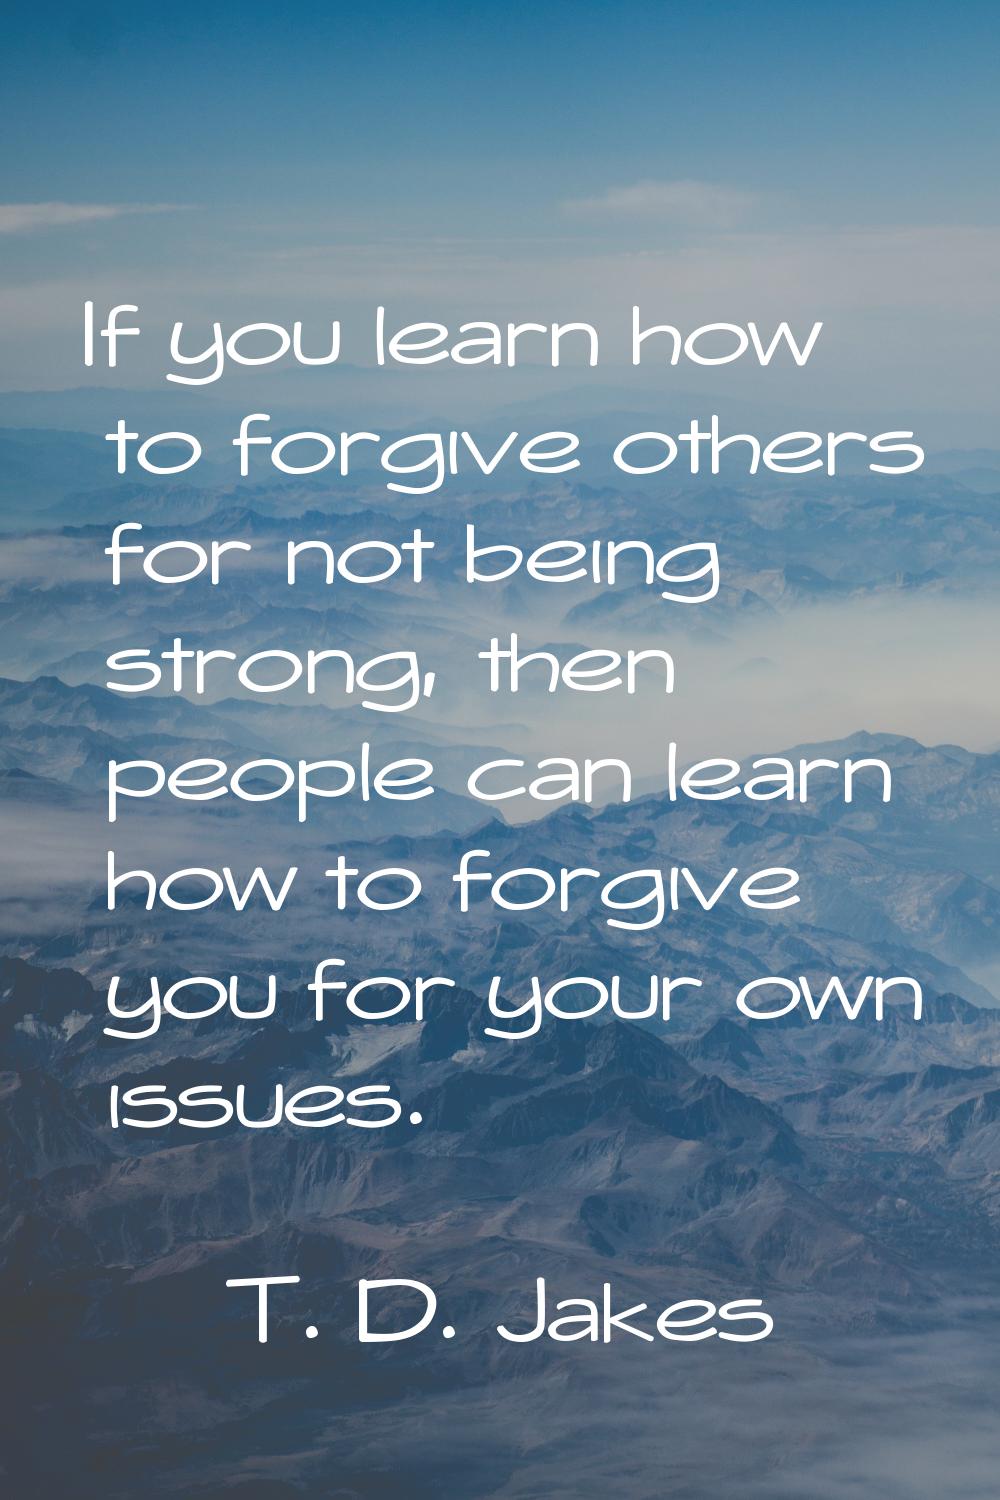 If you learn how to forgive others for not being strong, then people can learn how to forgive you f